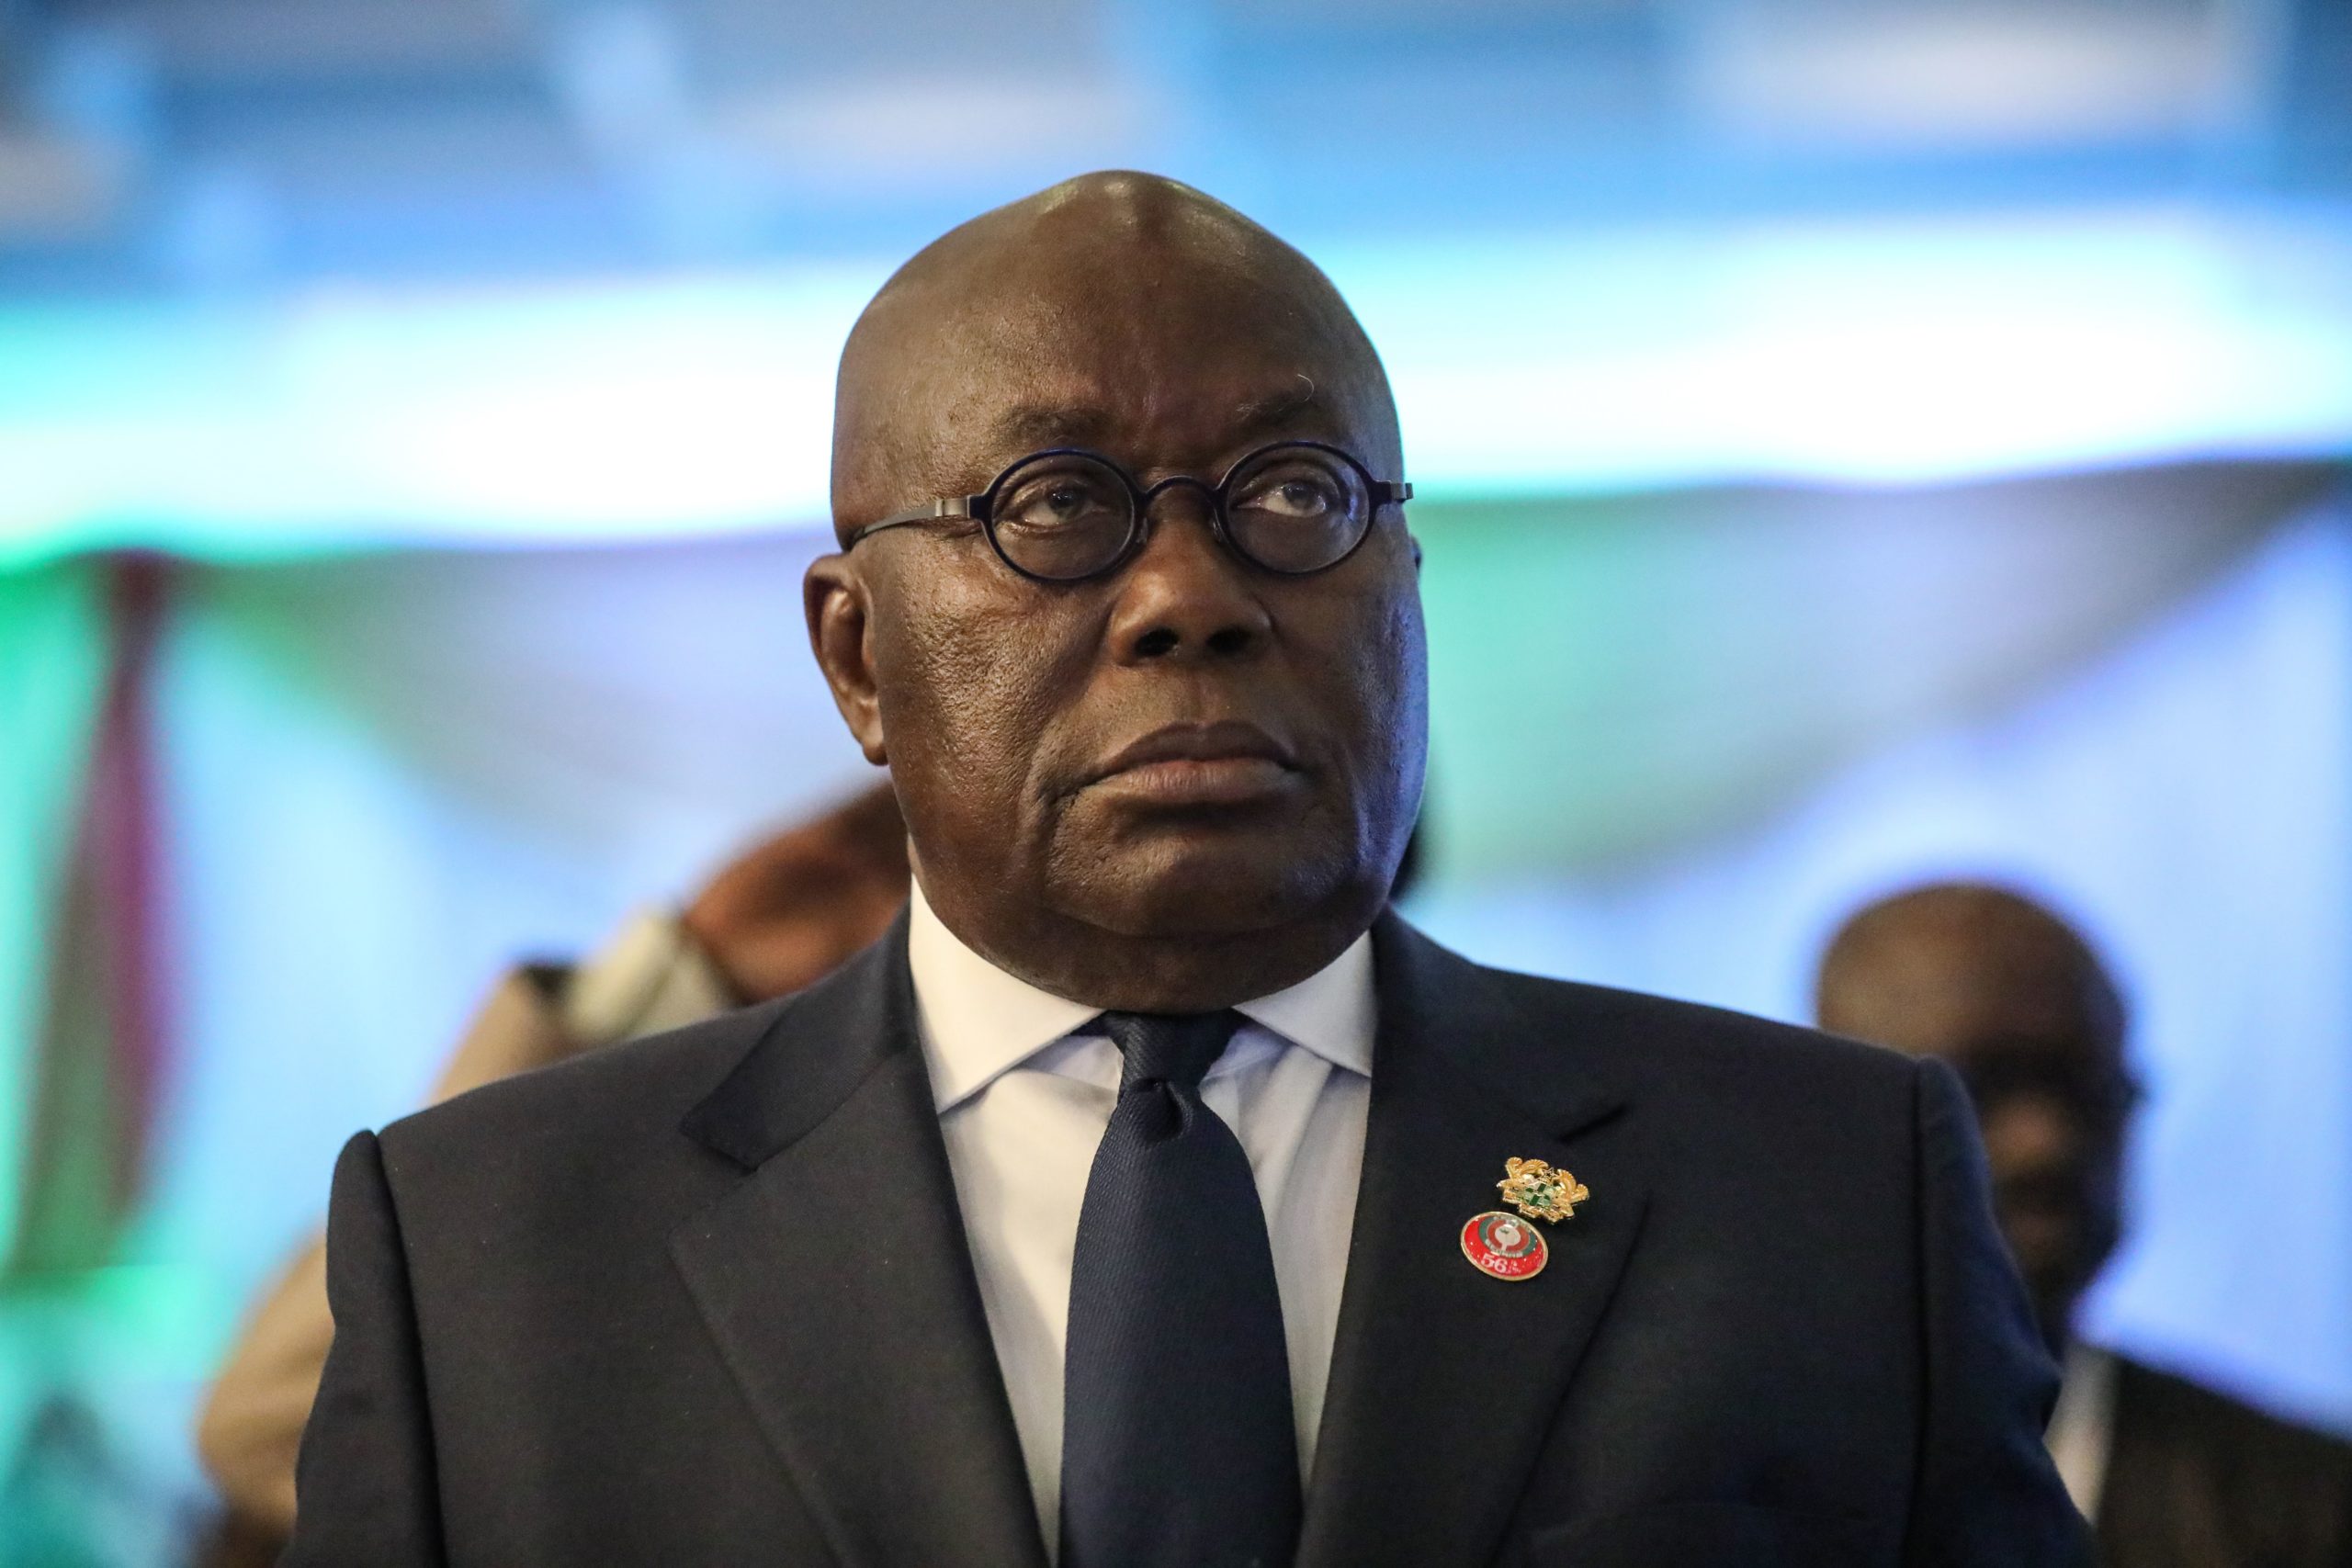 Ghanaian President Nana Akufo-Addo said African countries must become more self-sufficient in light of the supply chain shocks caused by the Ukraine war.